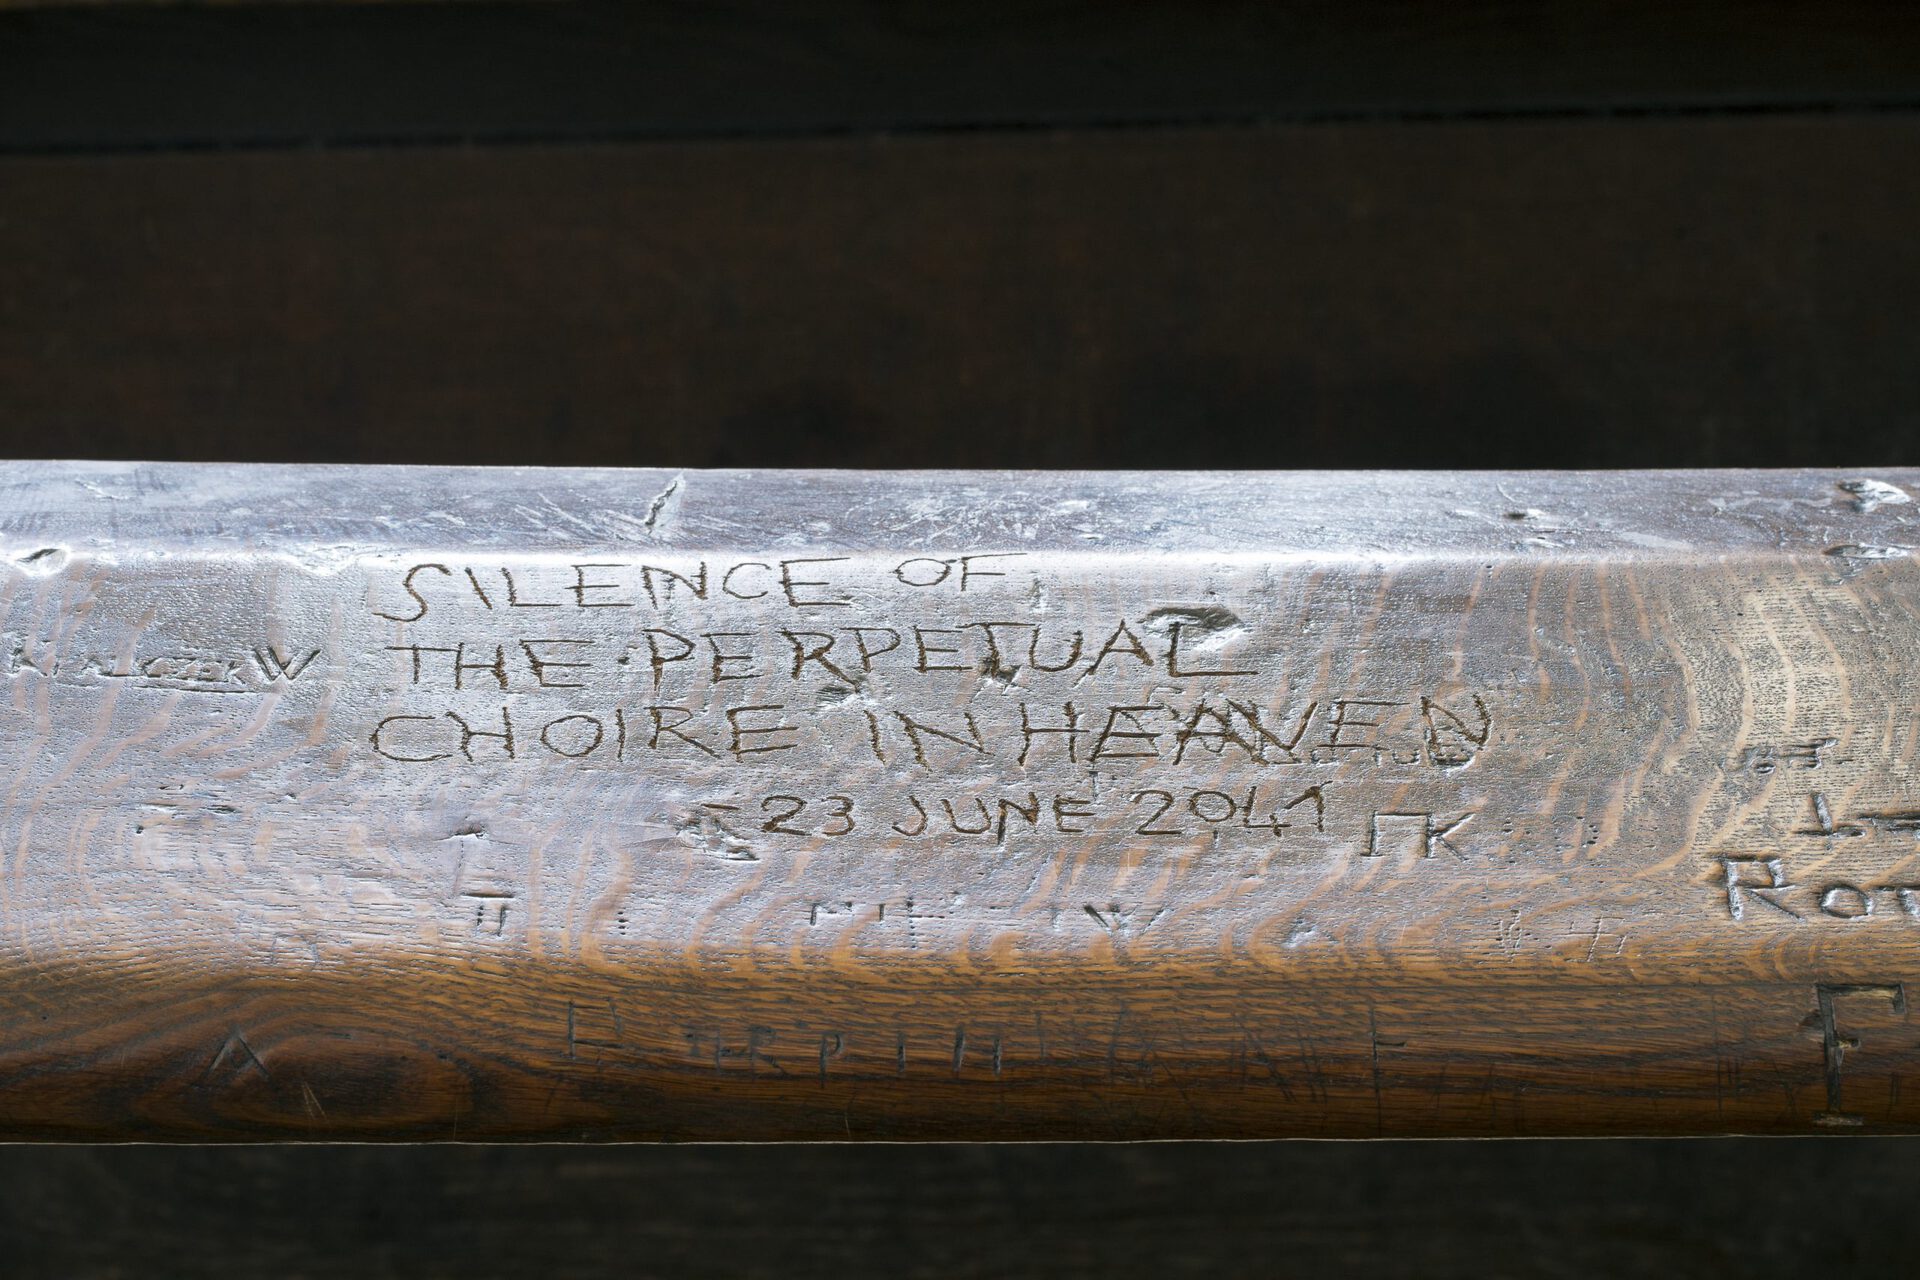 Ed Atkins, Untitled Anonymous, 2021 hand-engraved inscription “silence of the perpetual choire in heaven, 23 June 2041” on a wooden church pew